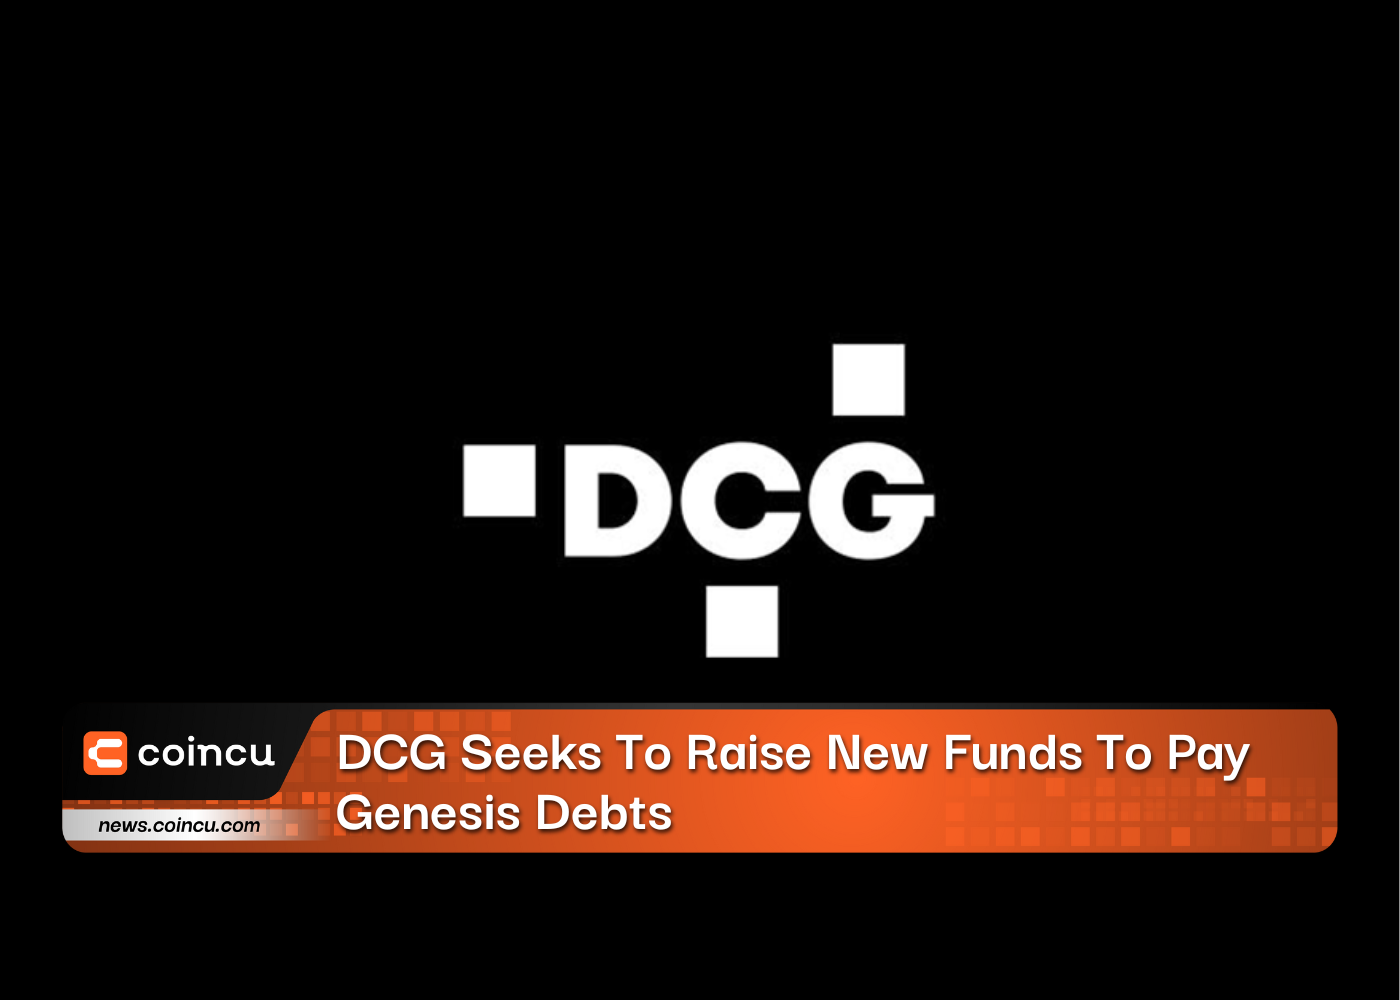 DCG Seeks To Raise New Funds To Pay Genesis Debts